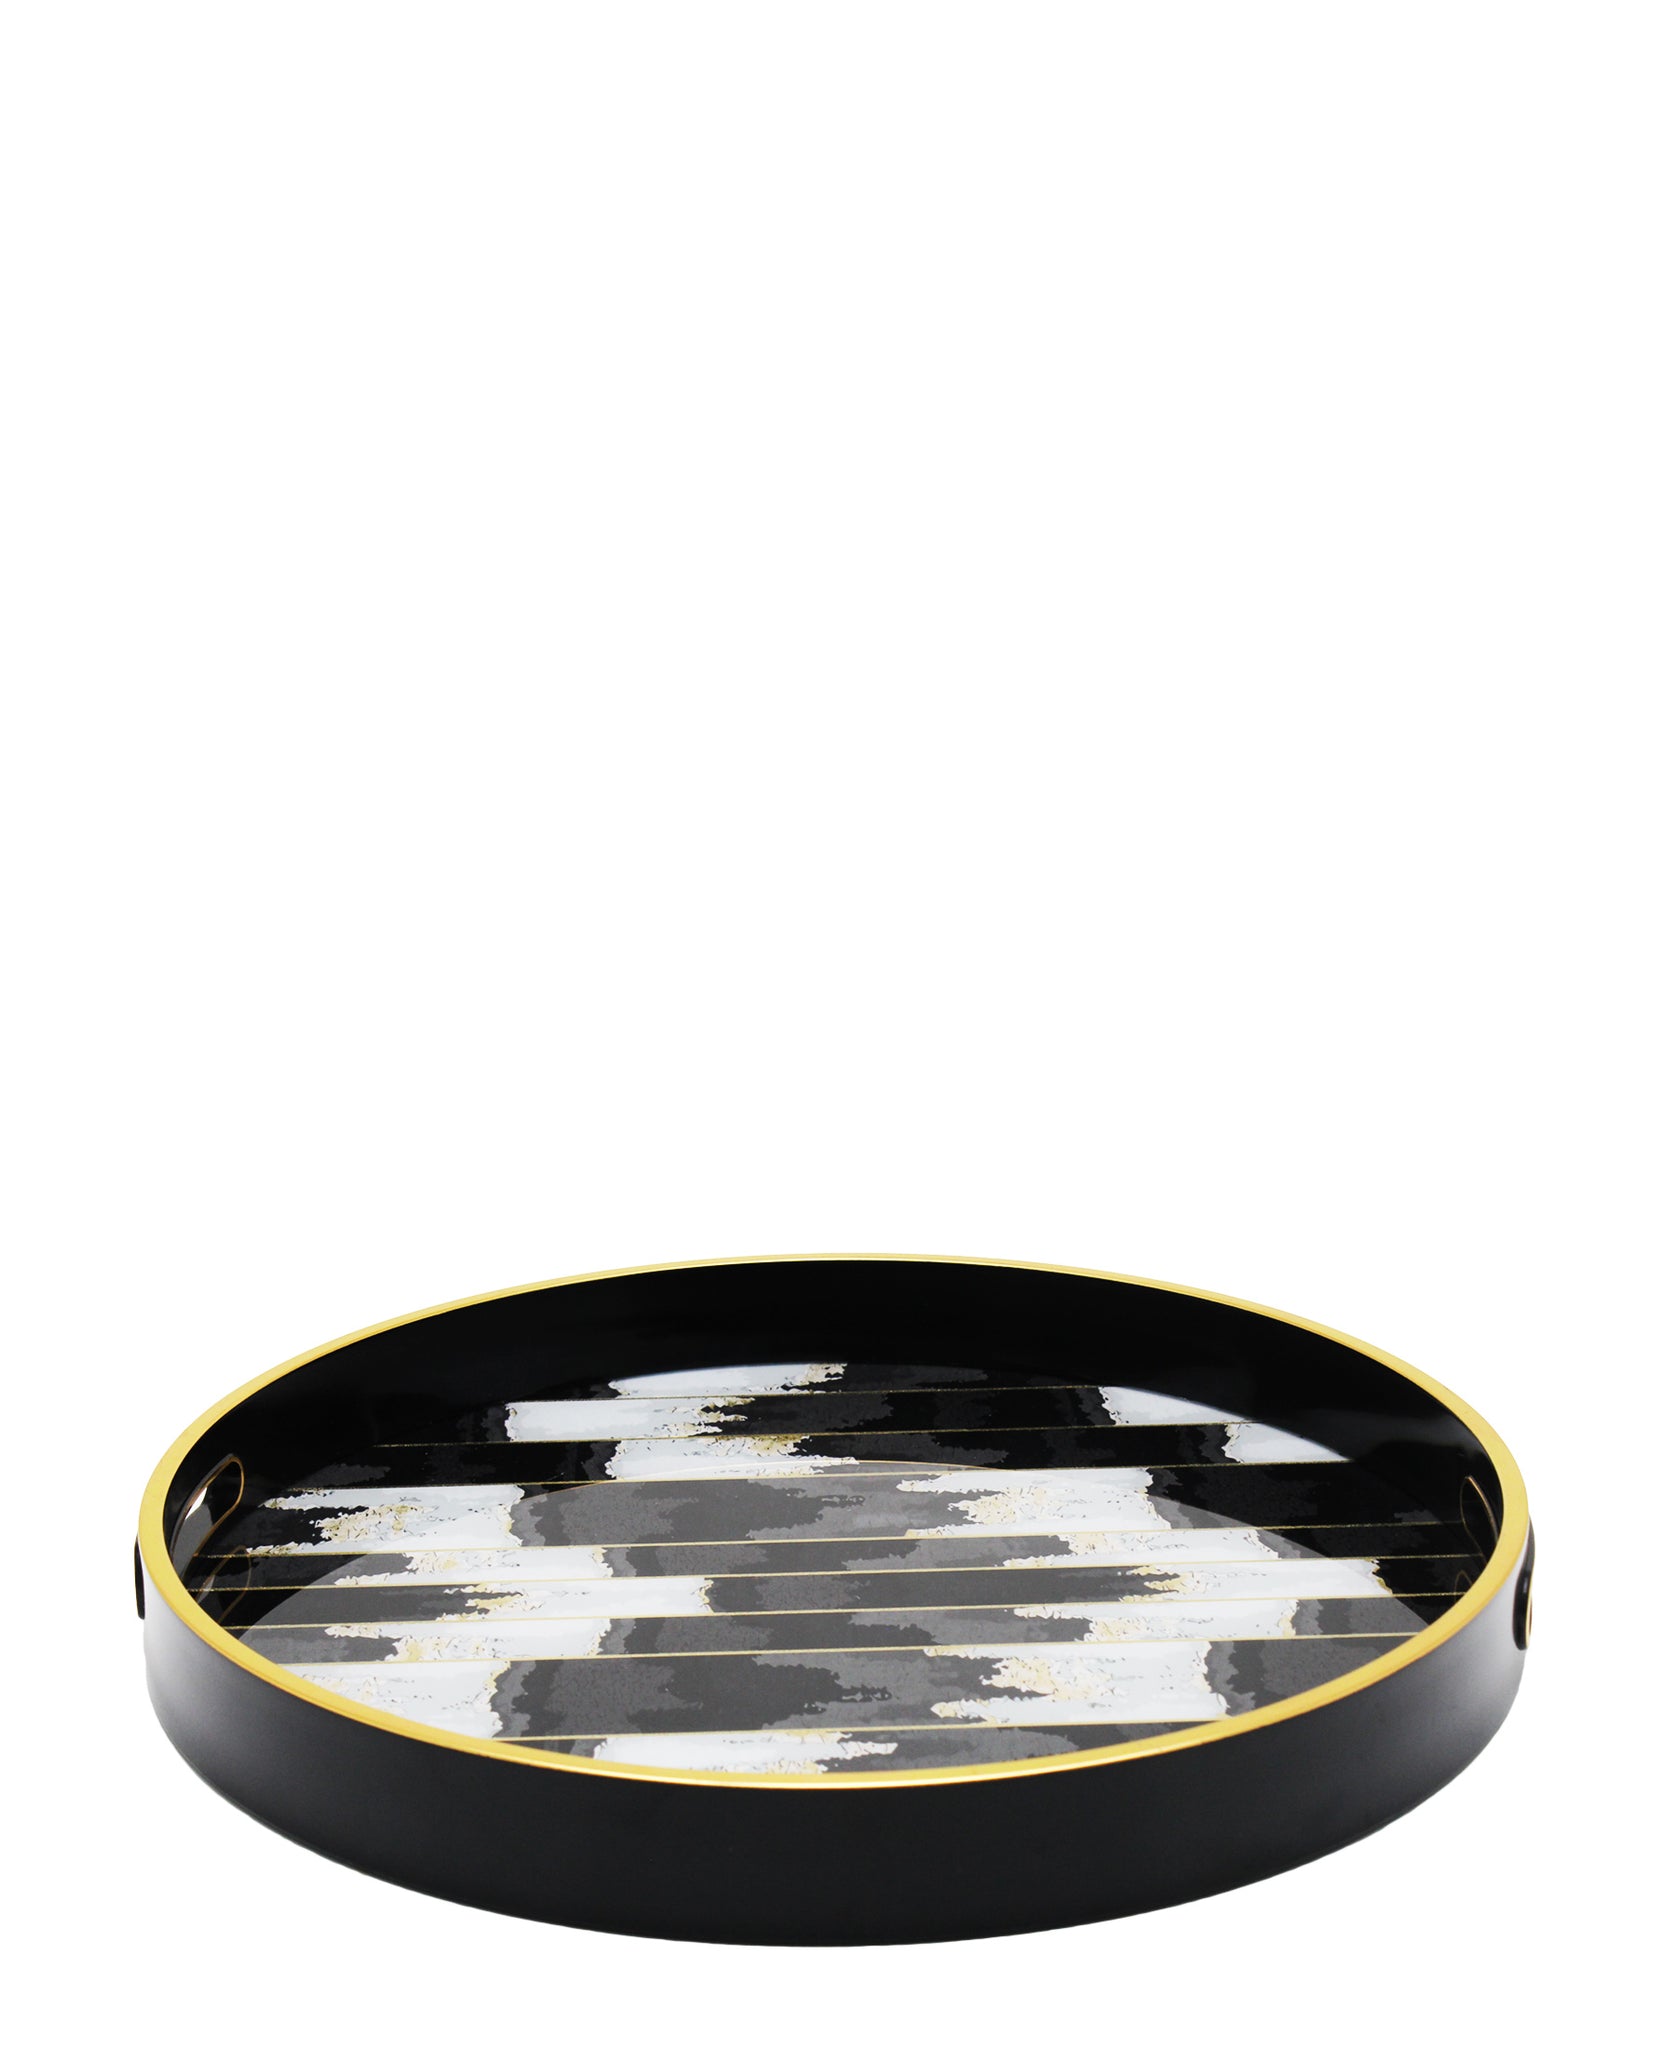 Urban Decor Glass 2 Piece Tray With Marble Finish - Black & White